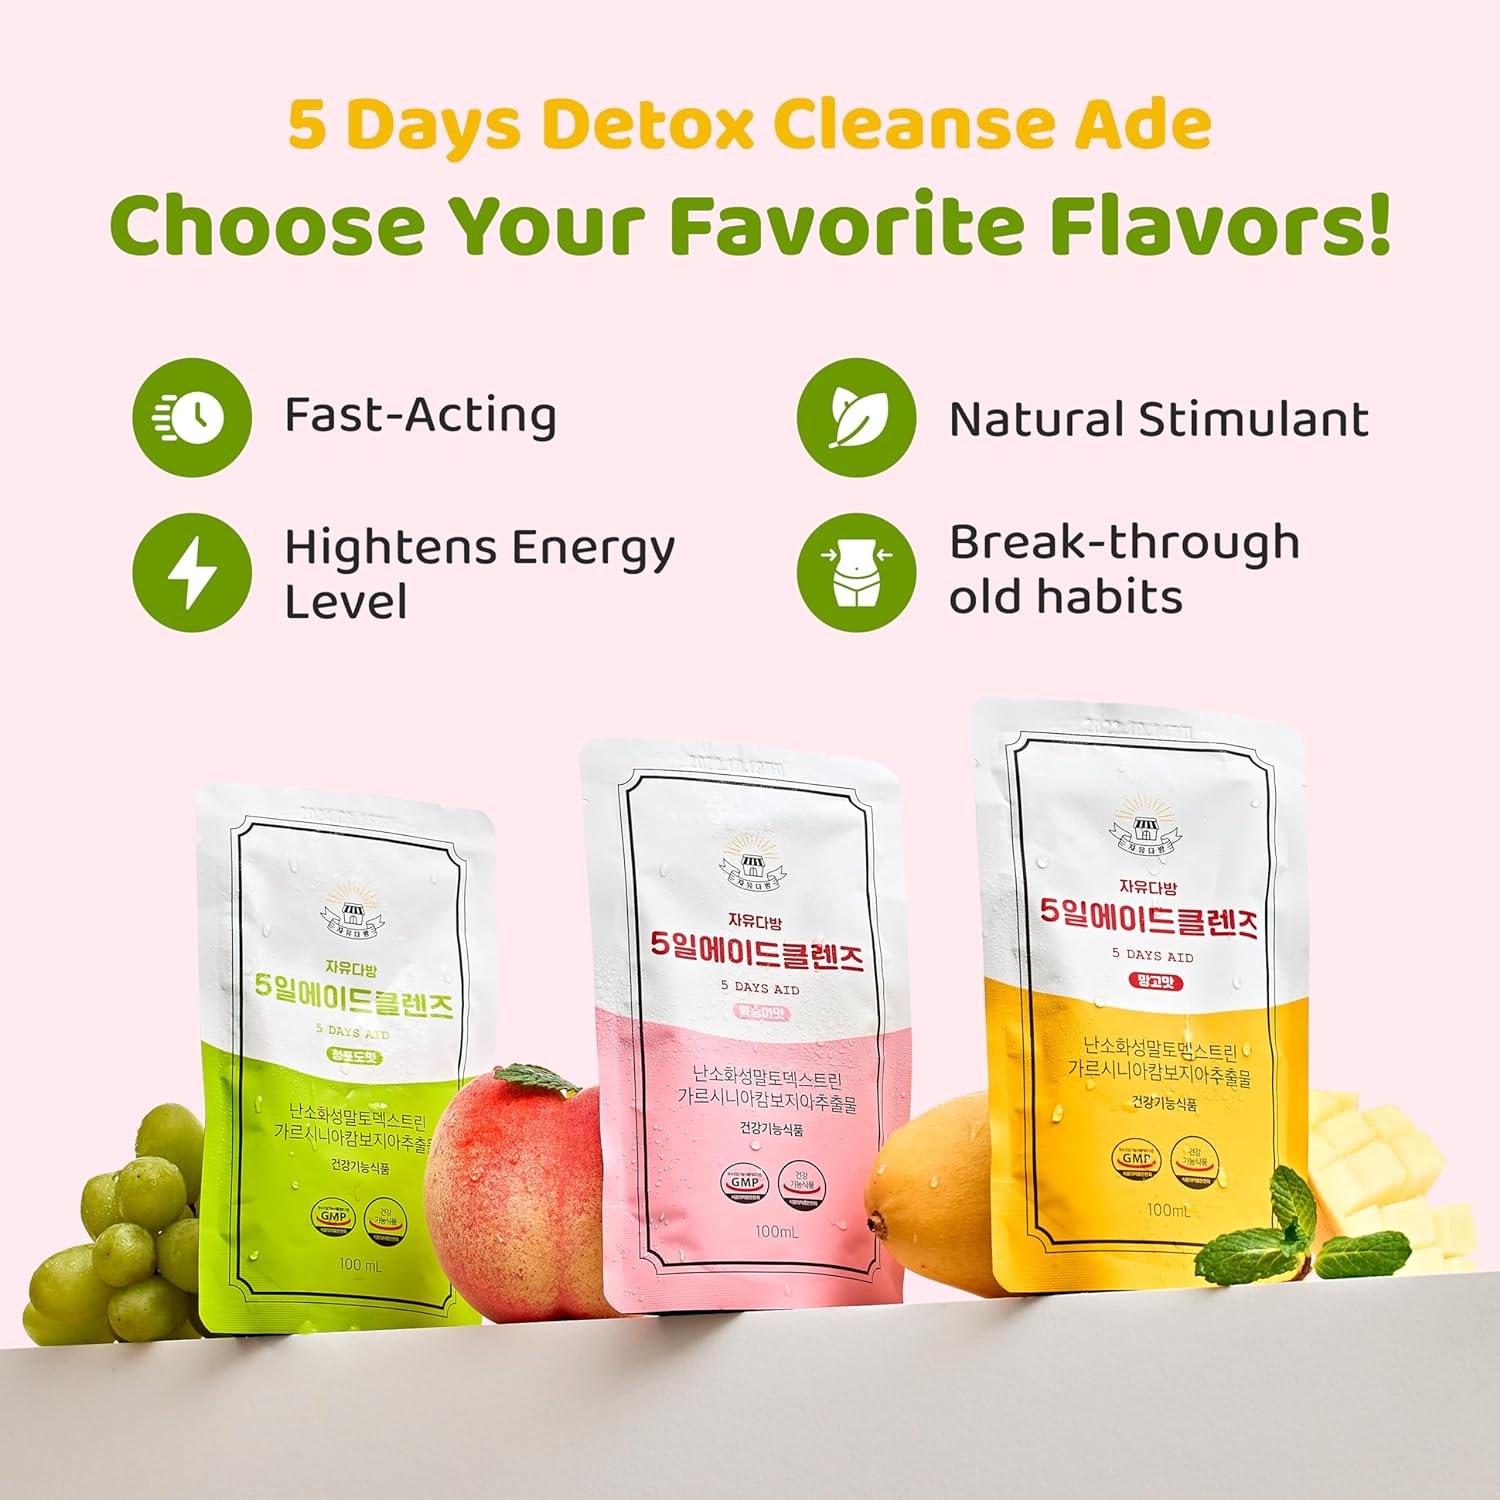 FreedomCafe 5 Day Detox Cleanse Ade Mango Flavor Review